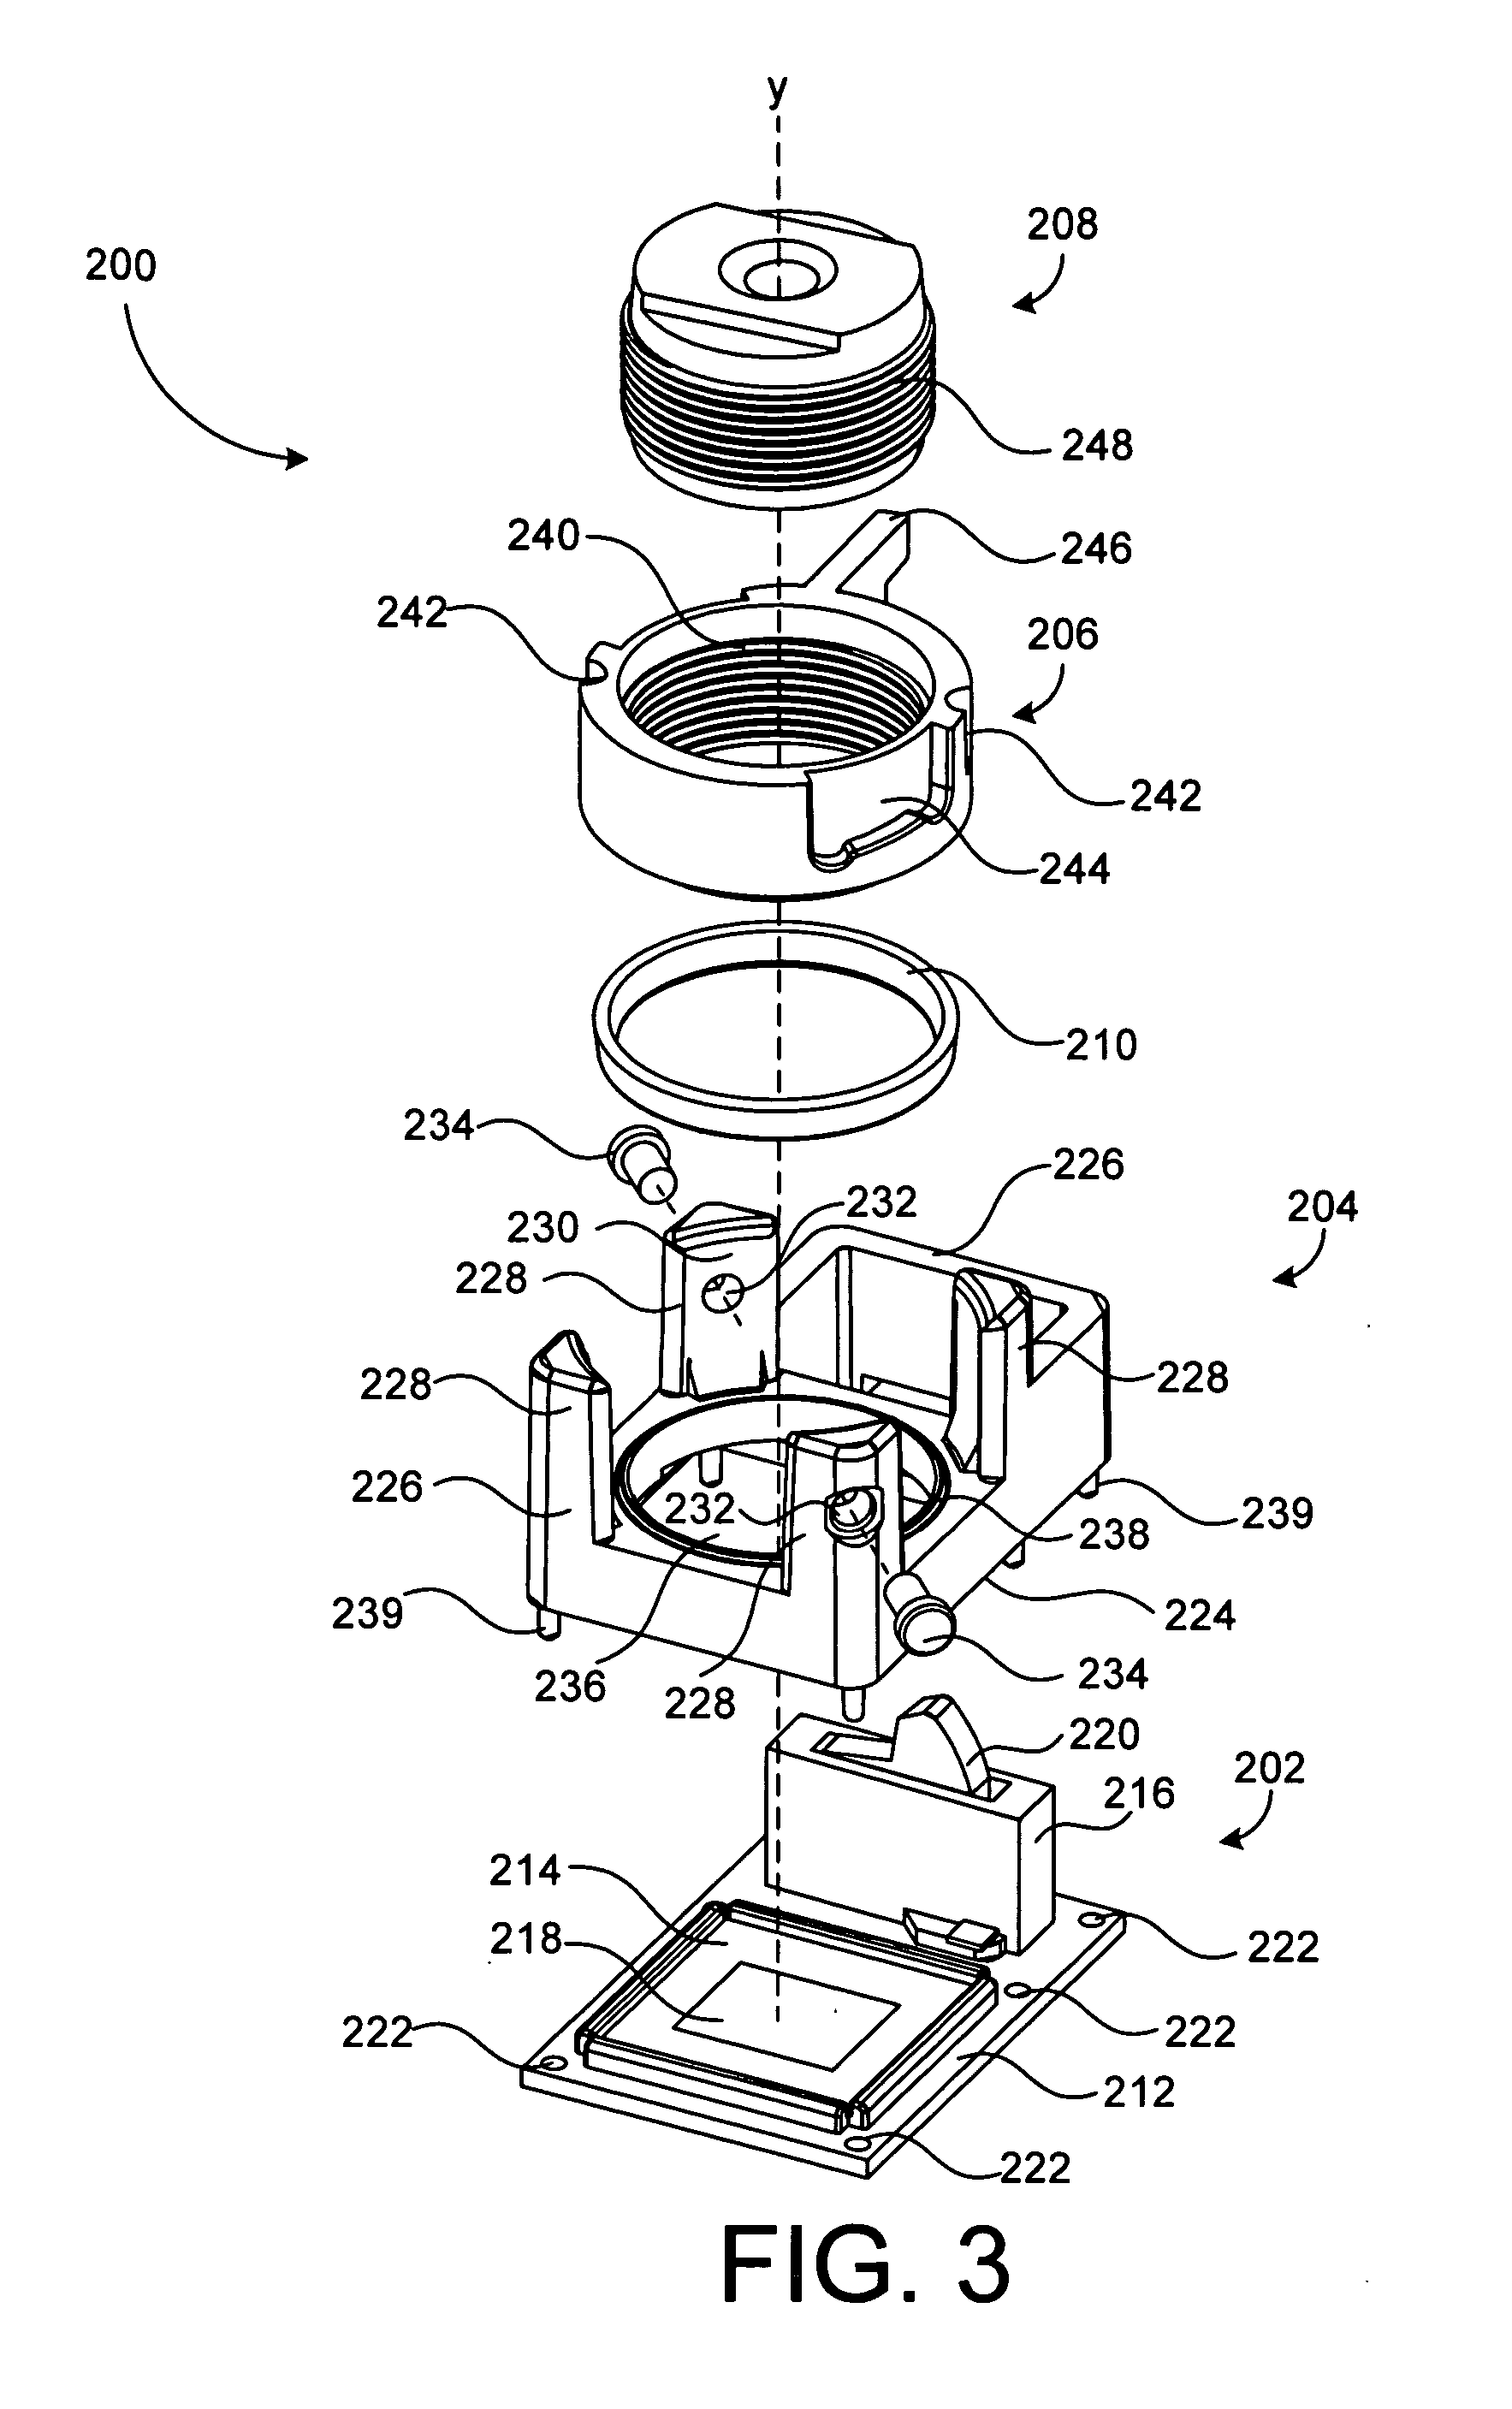 Micro camera module with discrete manual focal positions